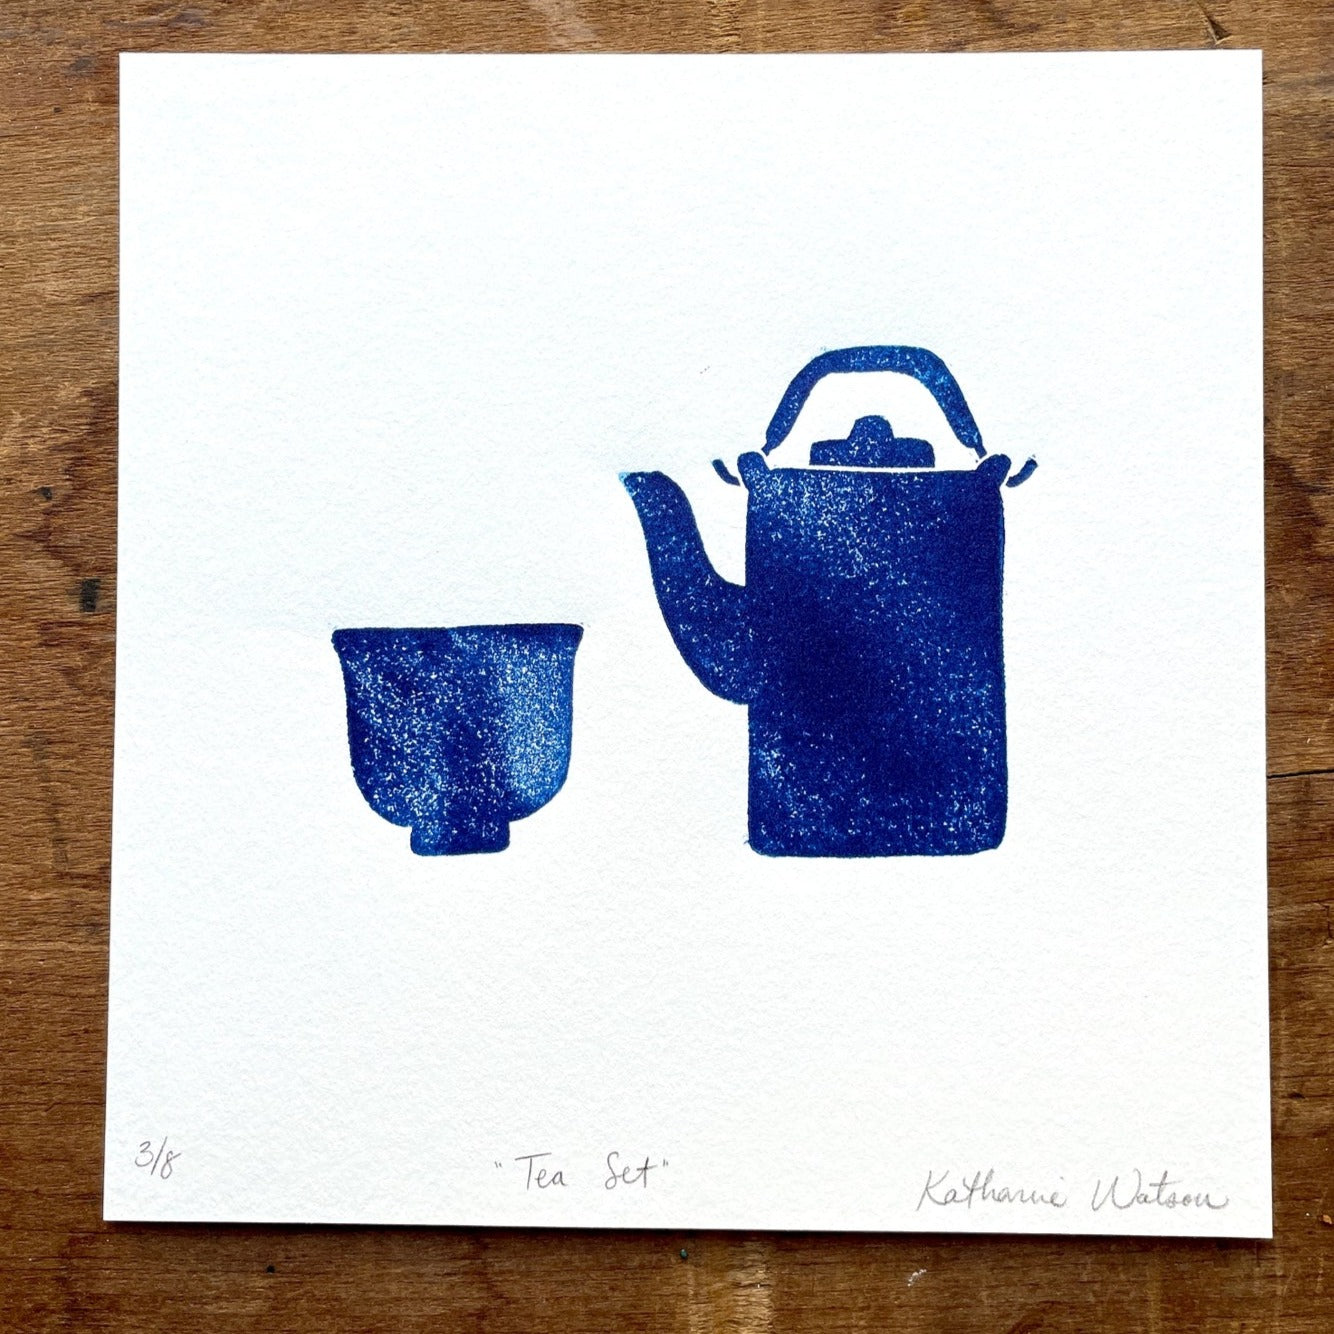 A block print of a teapot and cup in navy ink